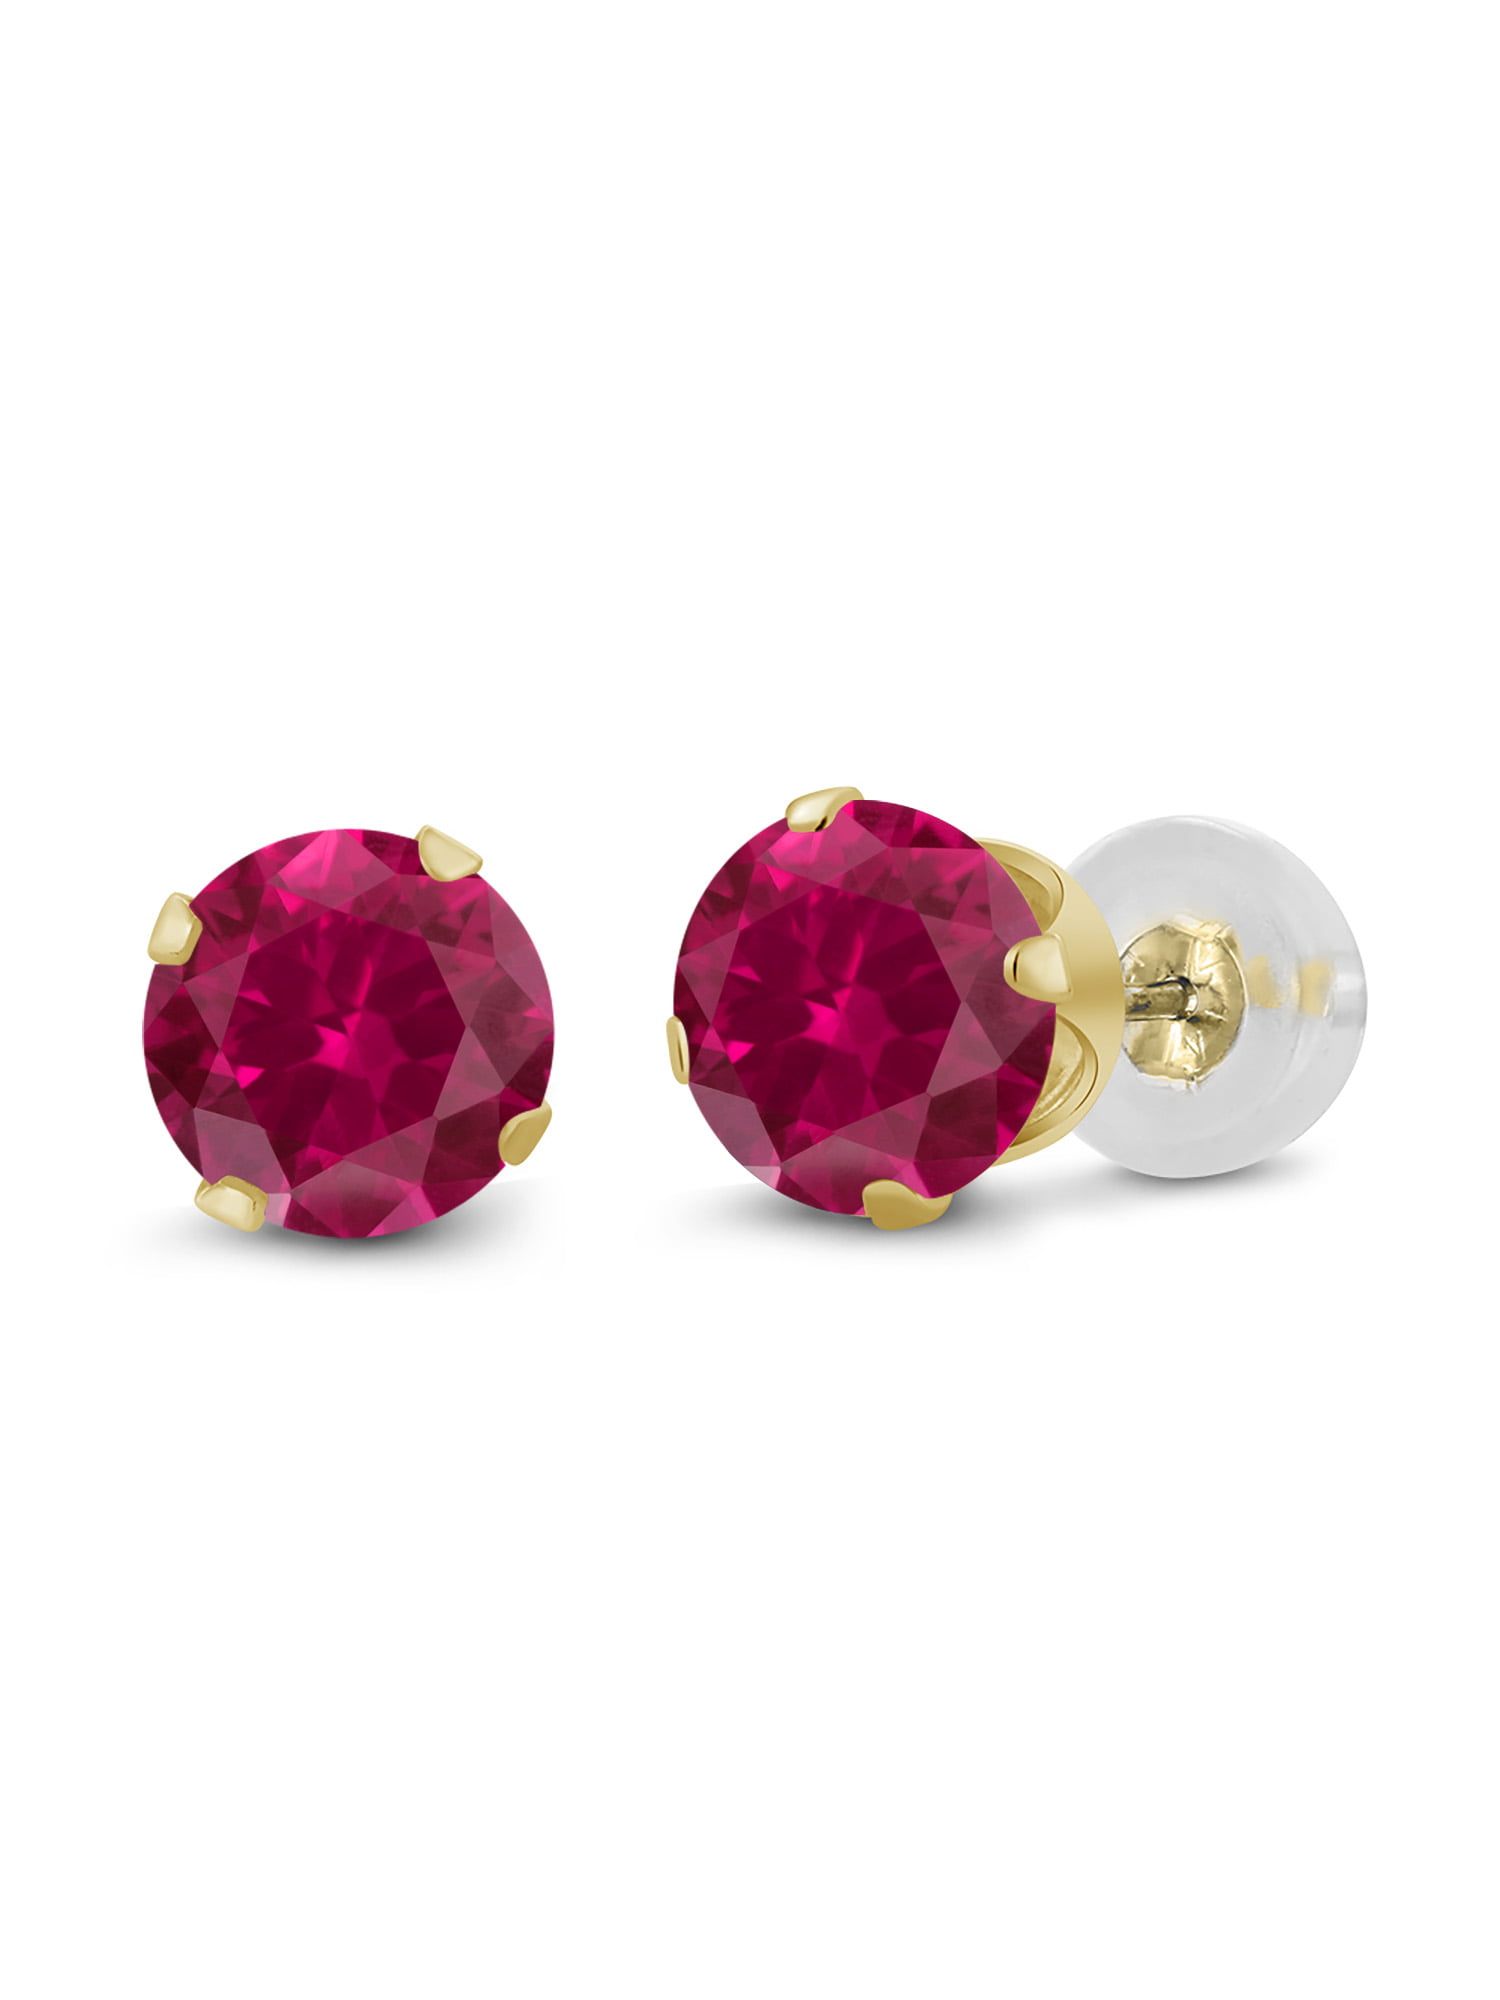 Round 6mm Genuine Red Ruby 10k White Gold Stud Earrings 